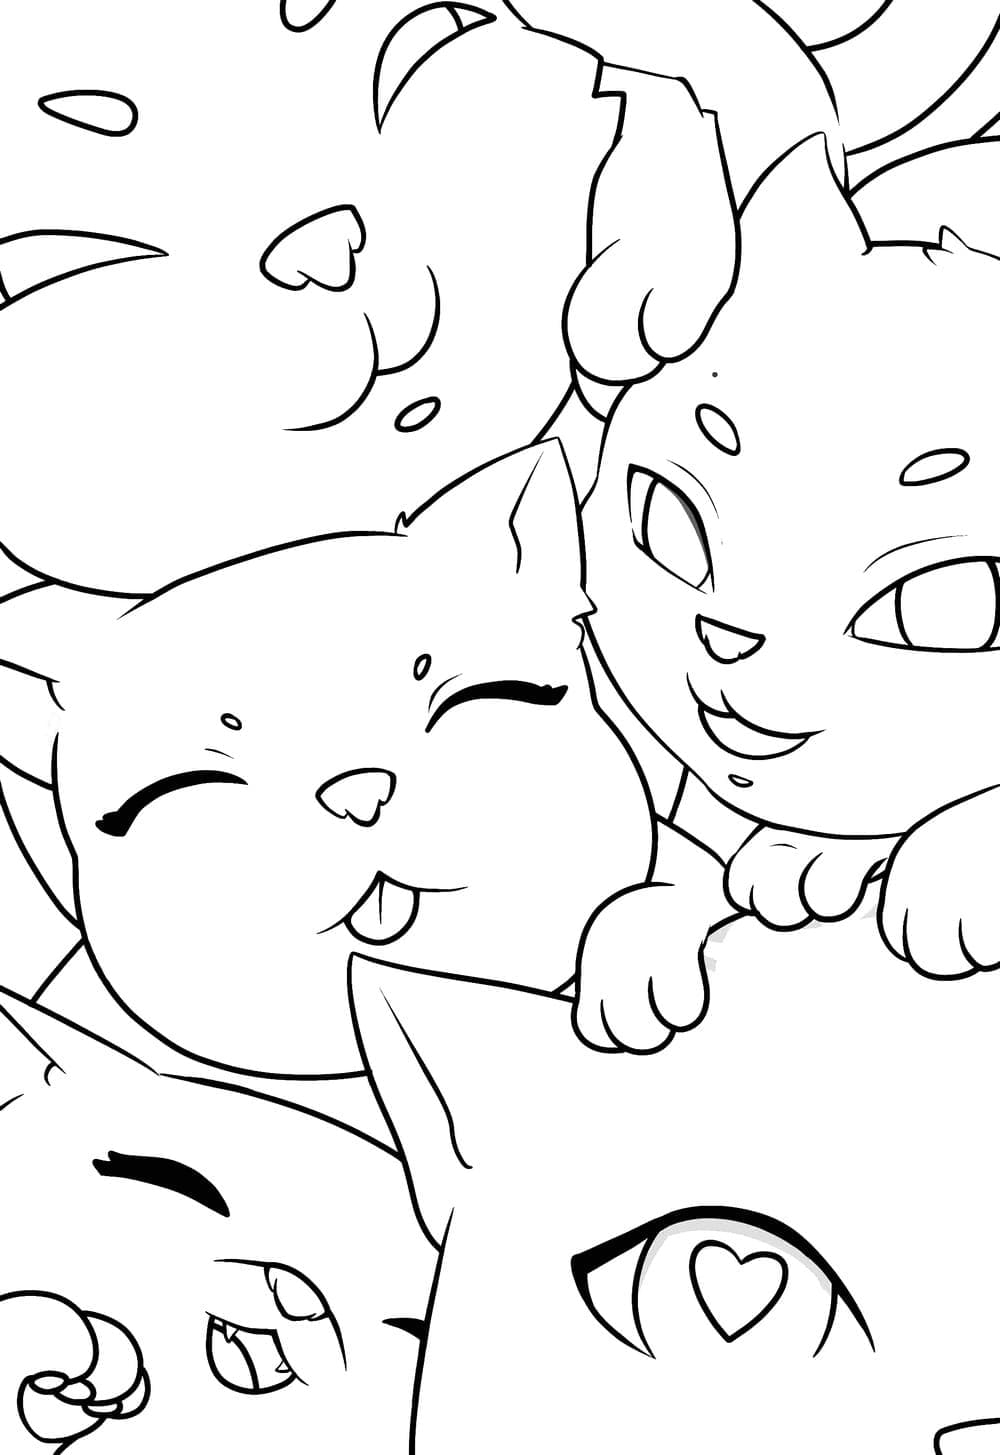 Kittens printable coloring page